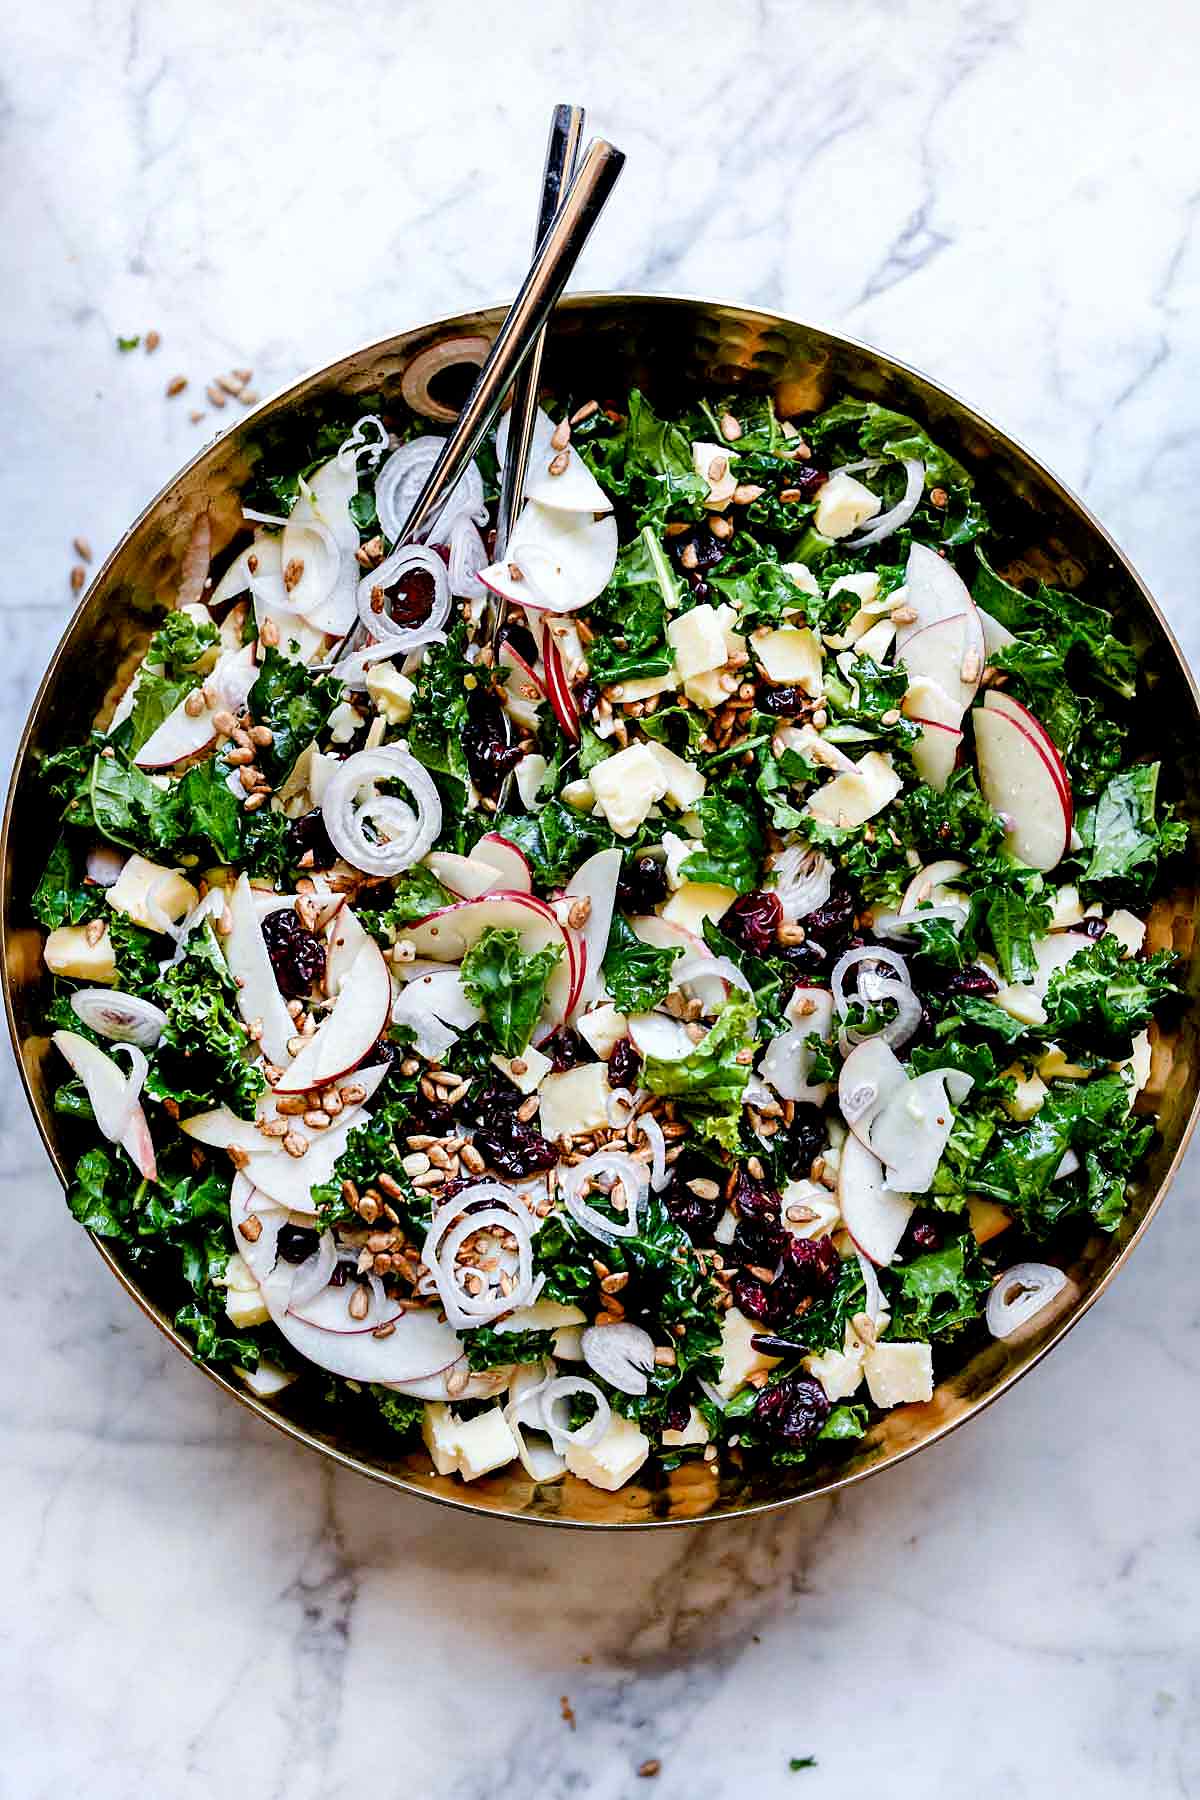 Kale Salad with Cranberries, Apples and Cheddar Cheese | foodiecrush.com #kale #salad #healthy #easy #dressing #recipes